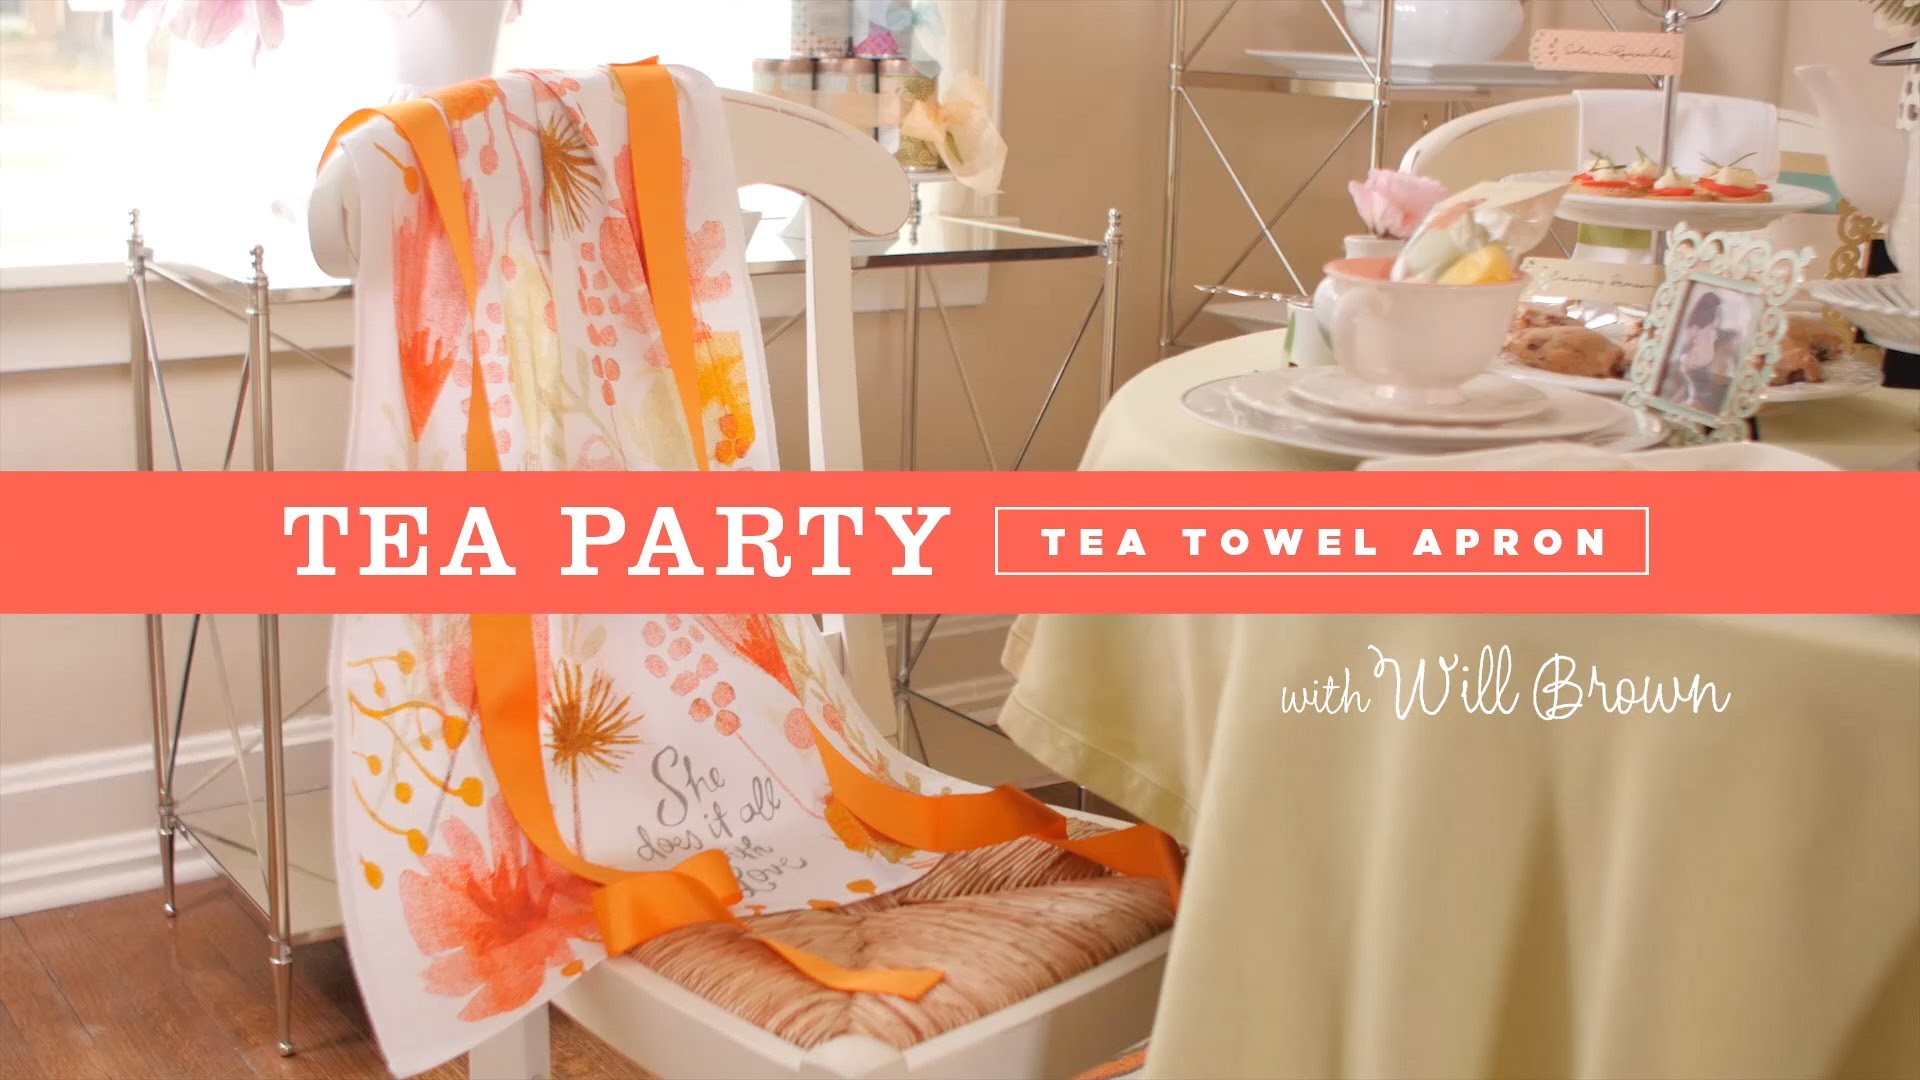 Make an easy-to-sew tea towel apron for a tea party